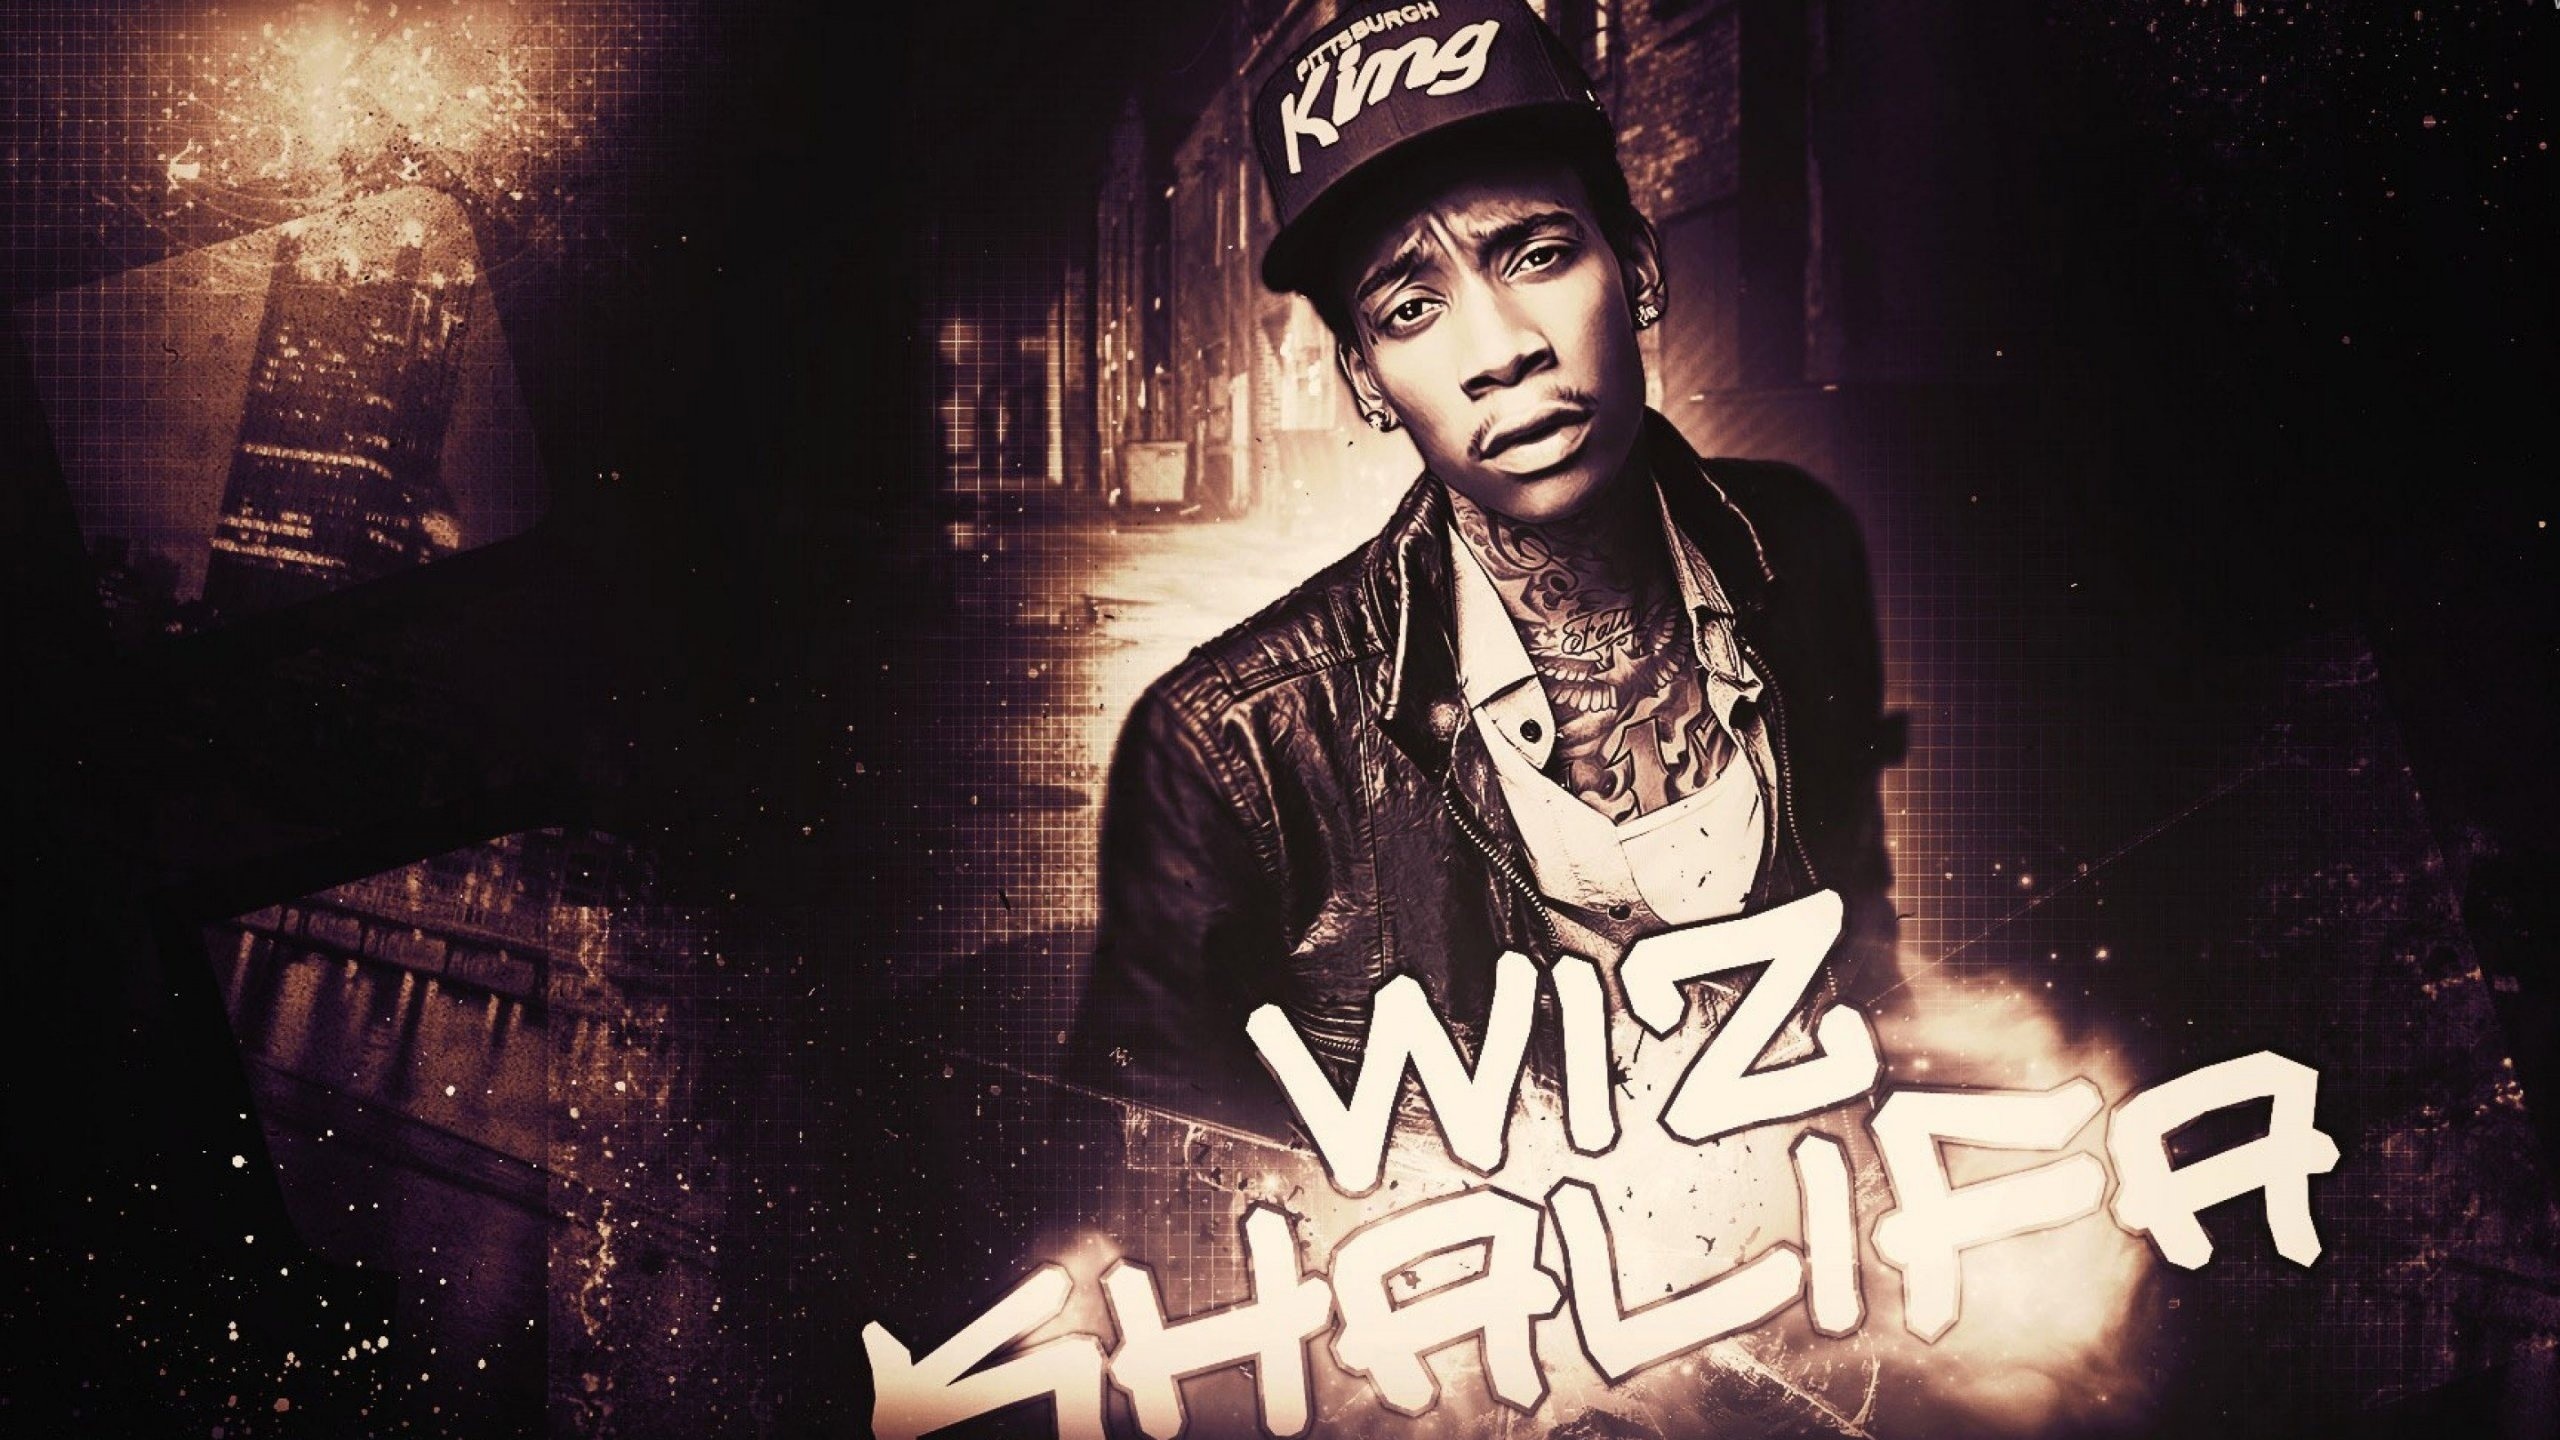 2560x1440 ... Wiz Khalifa Wallpapers Images Photos Pictures Backgrounds